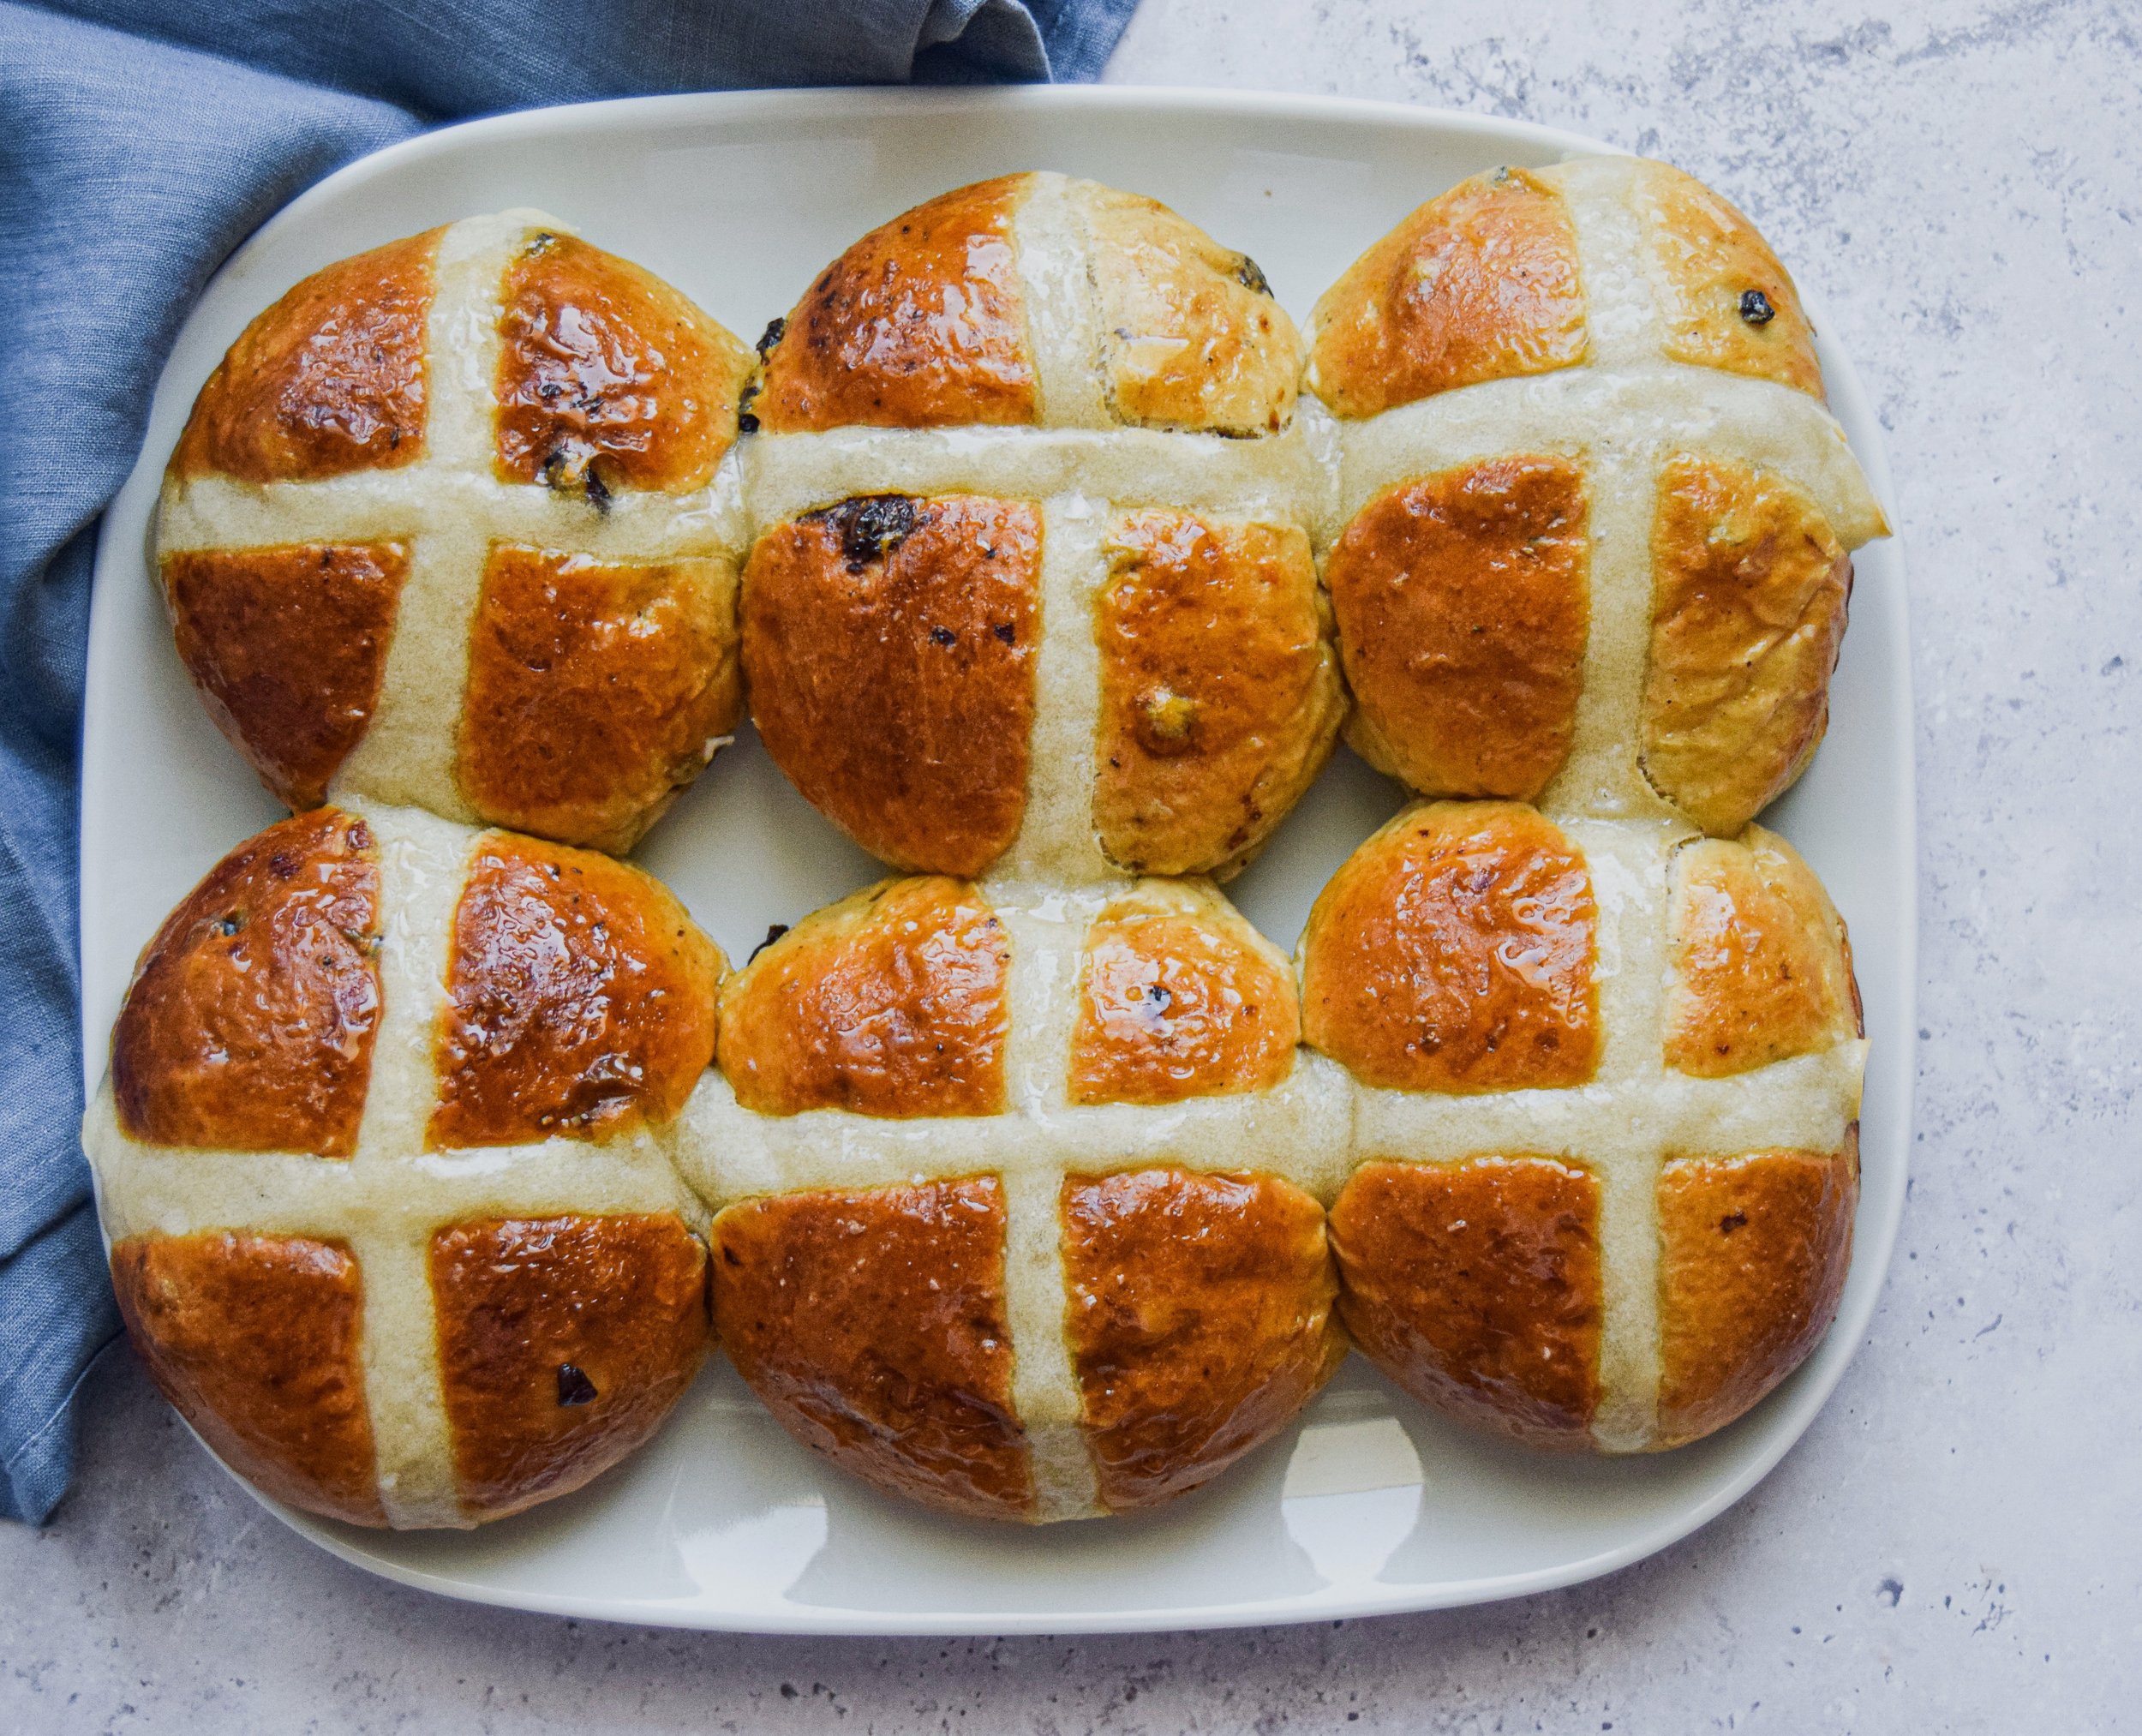 How to Make the World's Best Hot Cross Buns